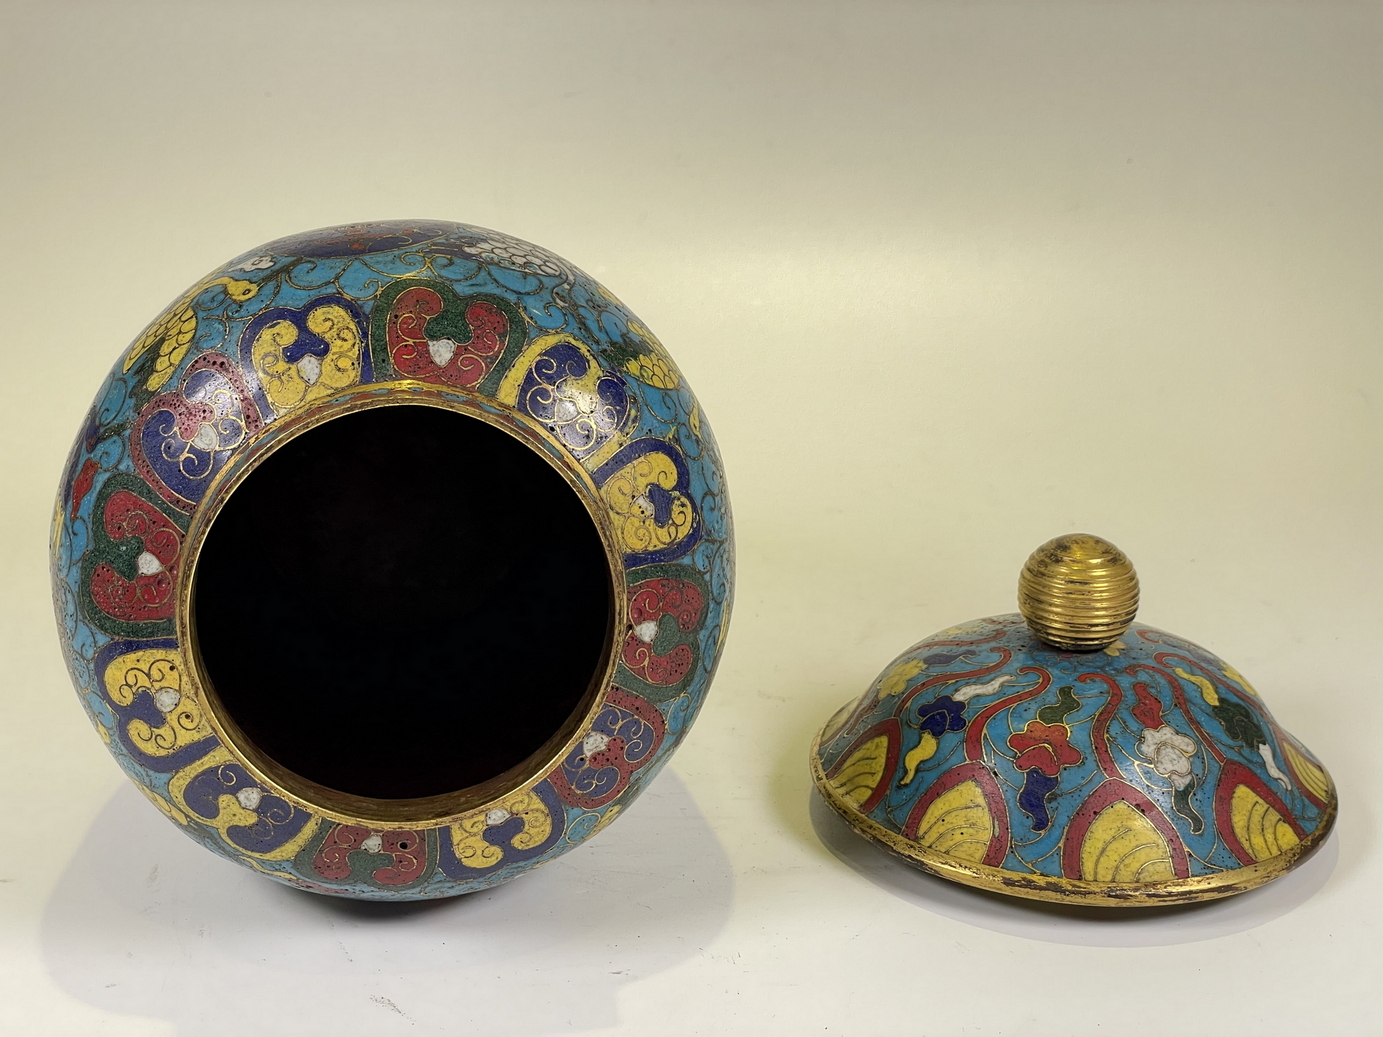 FINE CHINESE CLOISONNE, 17TH/21TH Century Pr.  Collection of NARA private gallary. - Image 9 of 10